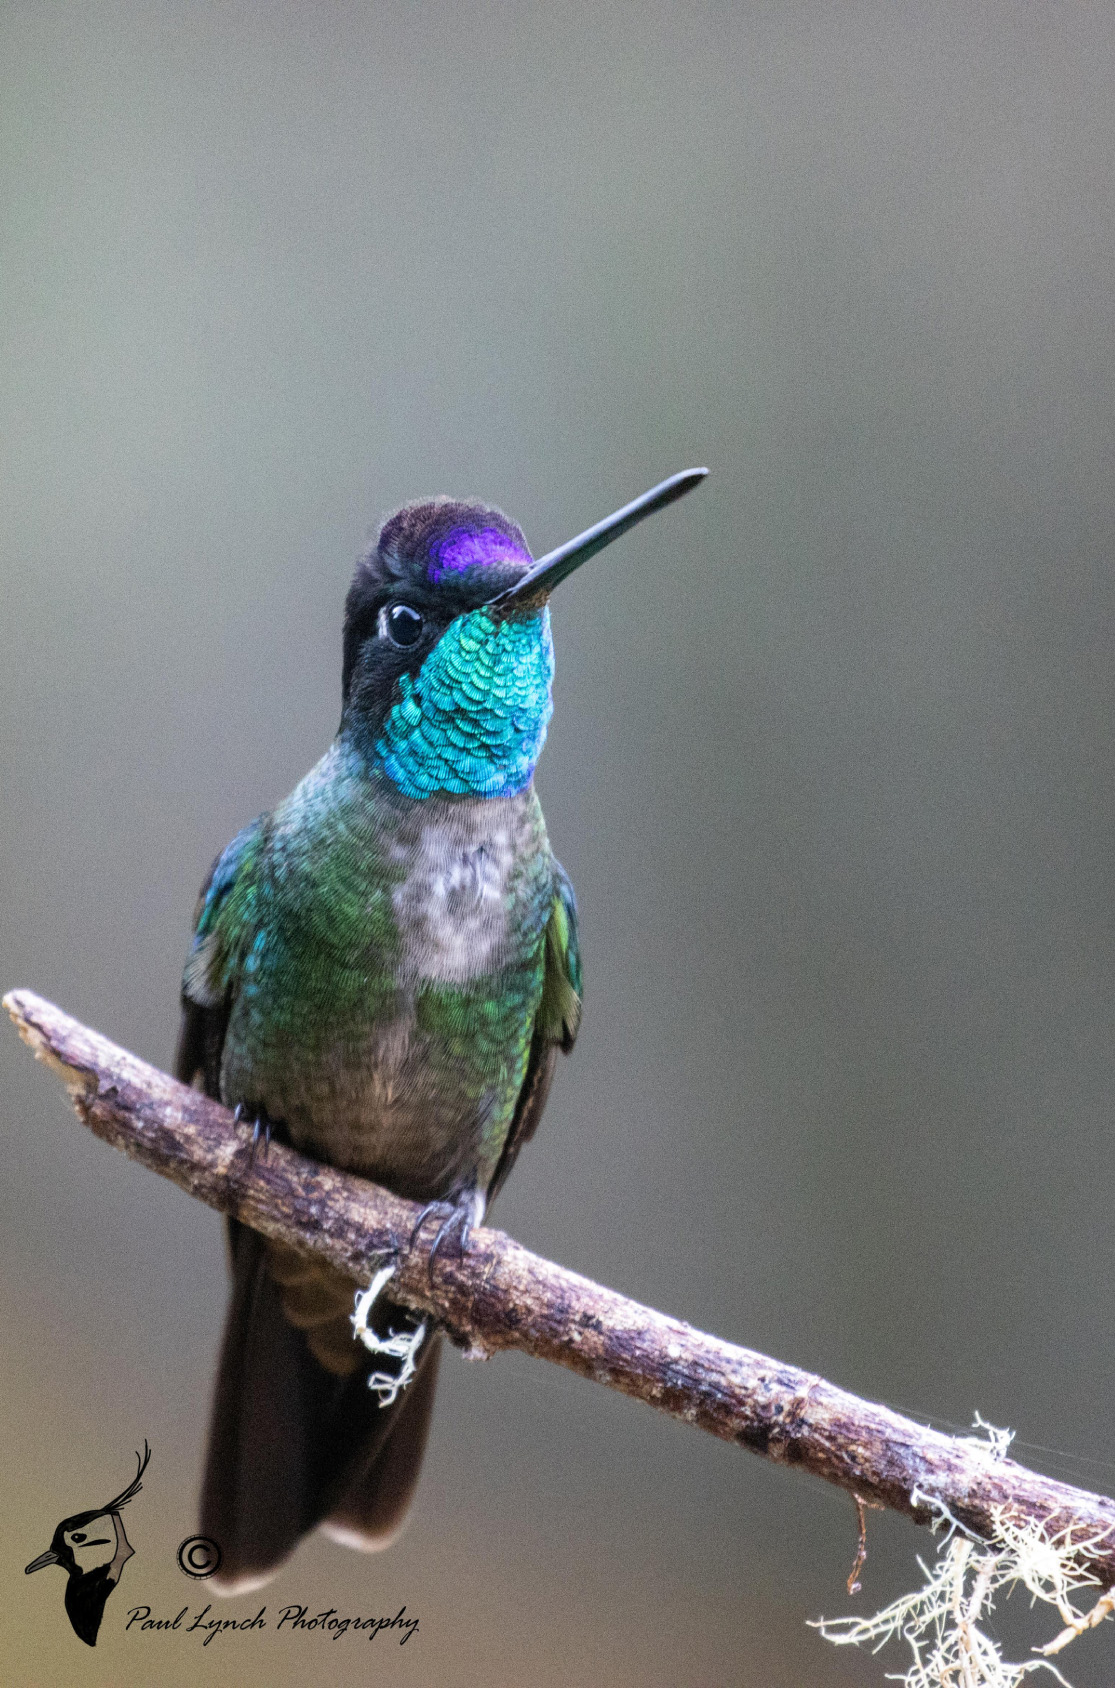 Hummingbird with purple aqua and green feather sittong on a bracnj looking to the right